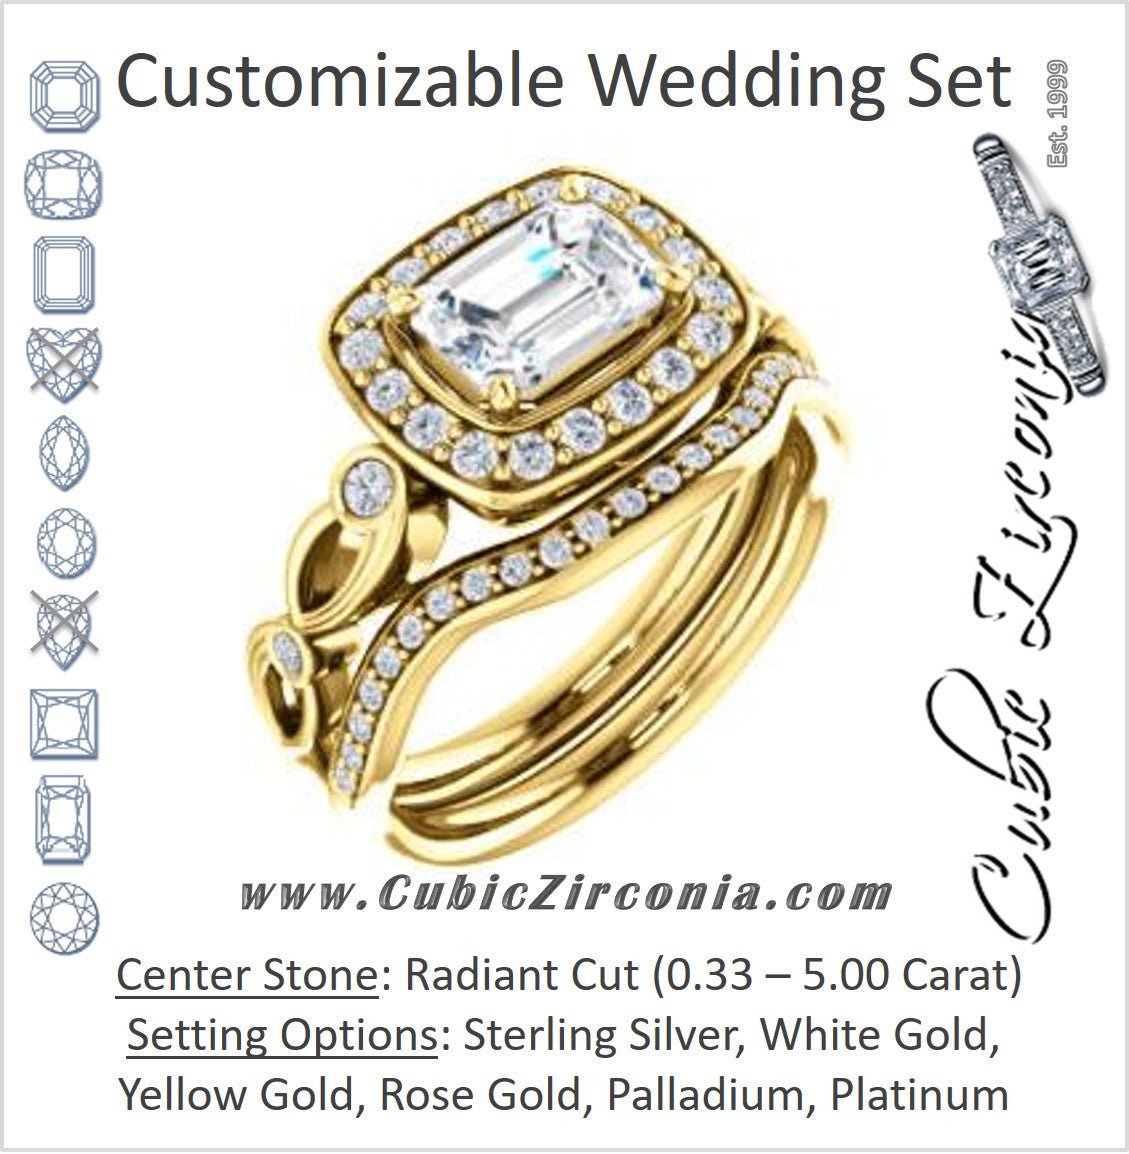 CZ Wedding Set, featuring The Madison engagement ring (Customizable Radiant Cut Design with Halo and Bezel-Accented Infinity-inspired Split Band)